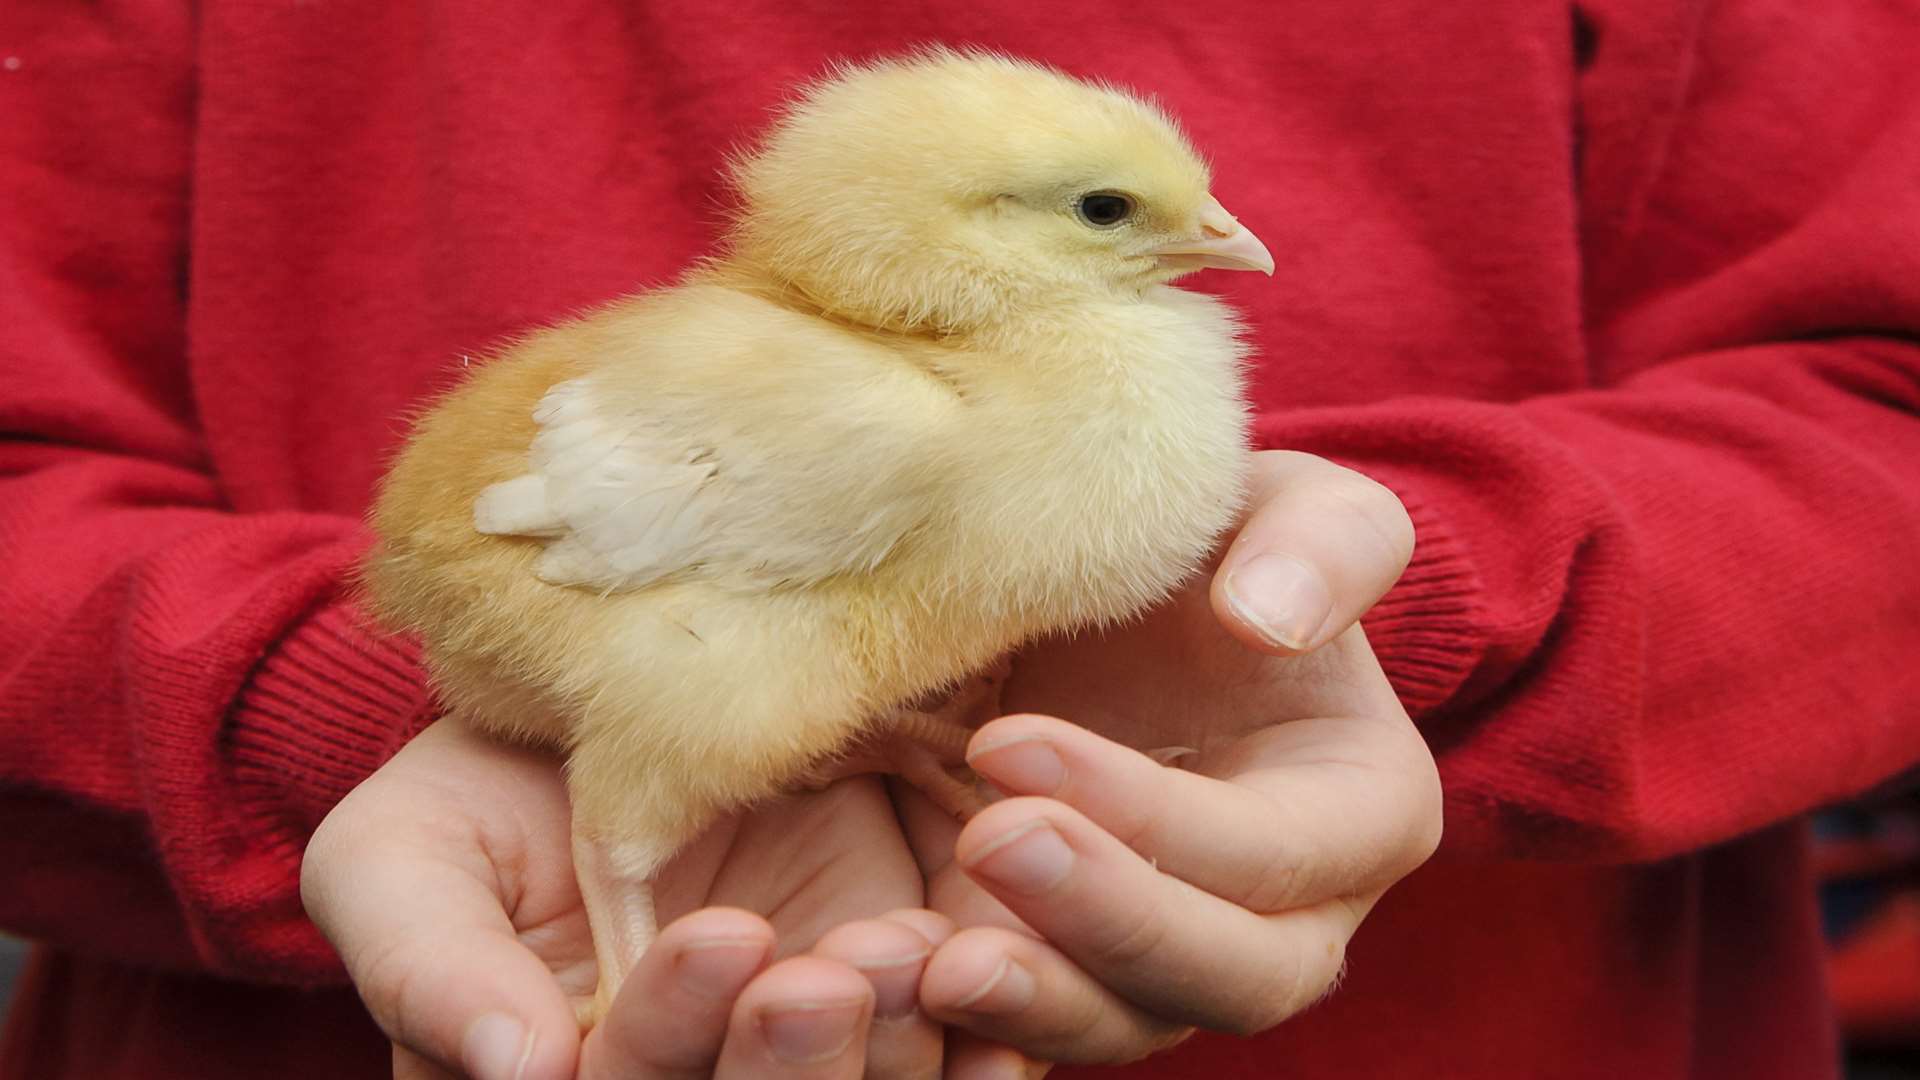 Many schools and nurseries are using so-called chick kits